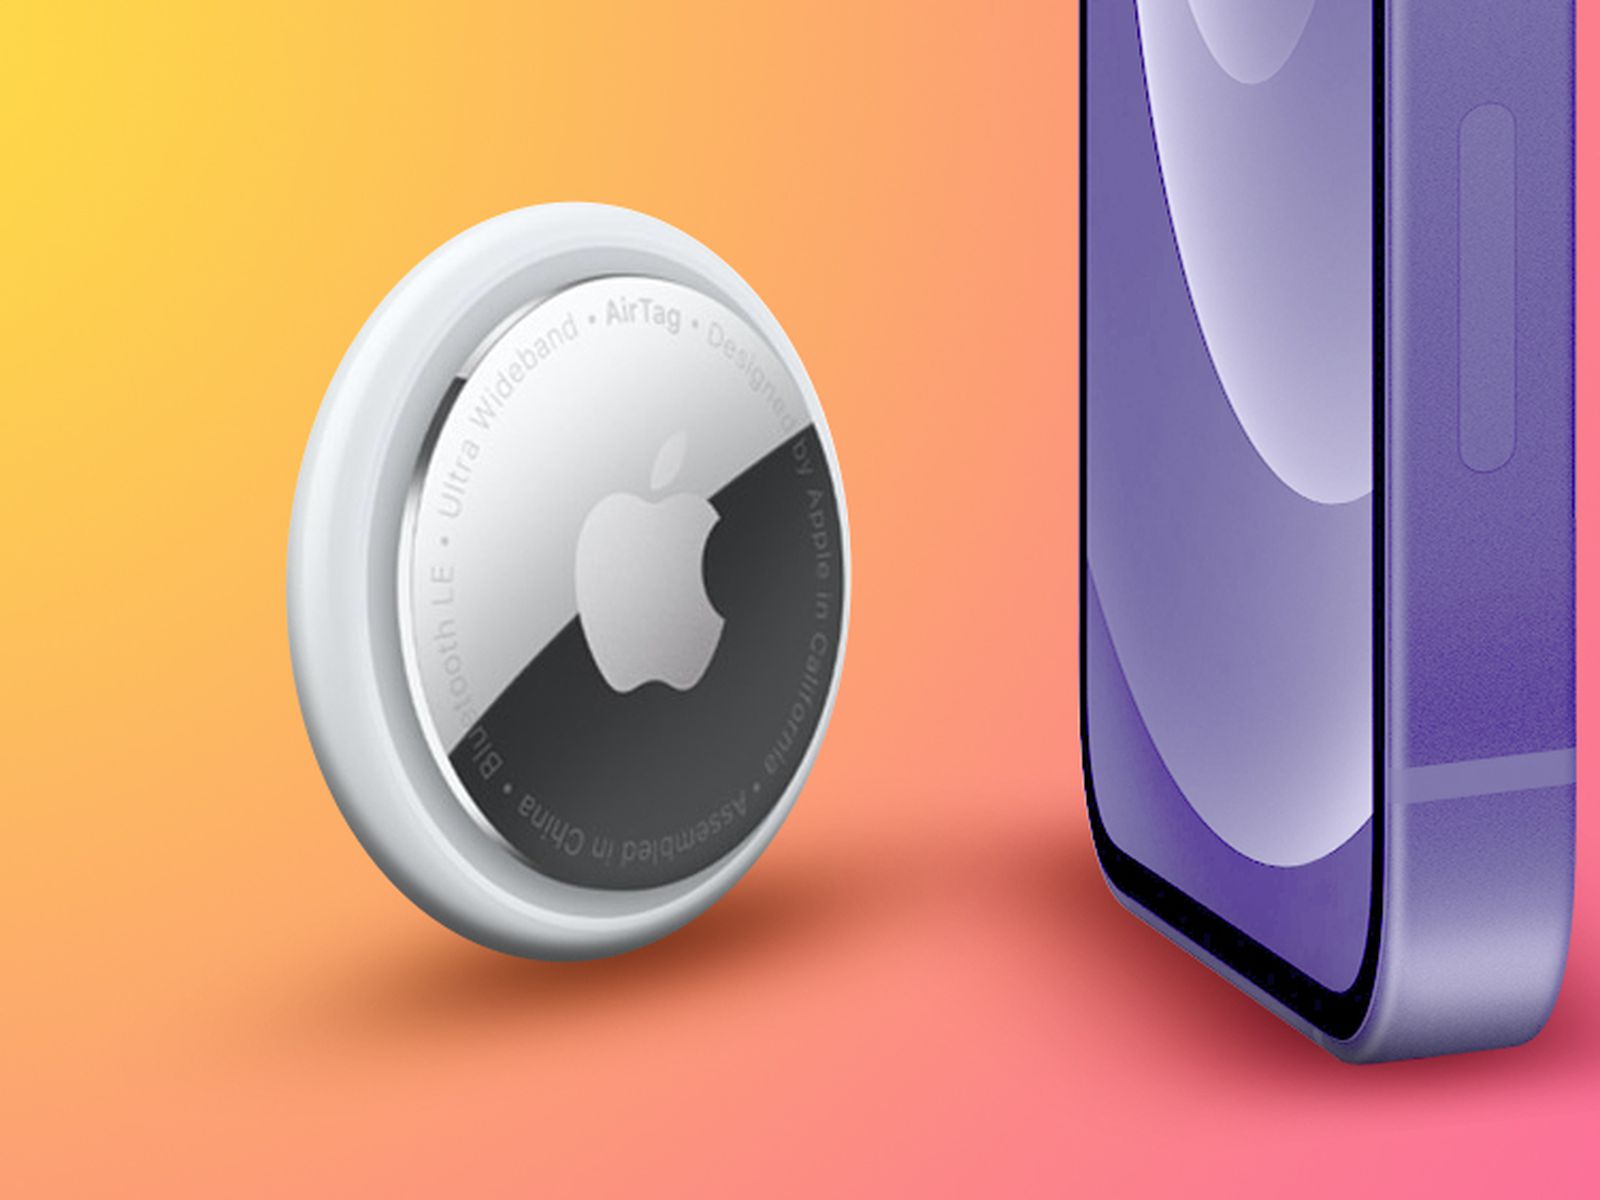 Deal Alert: Save 20% Off a 4-Pack of Apple AirTags